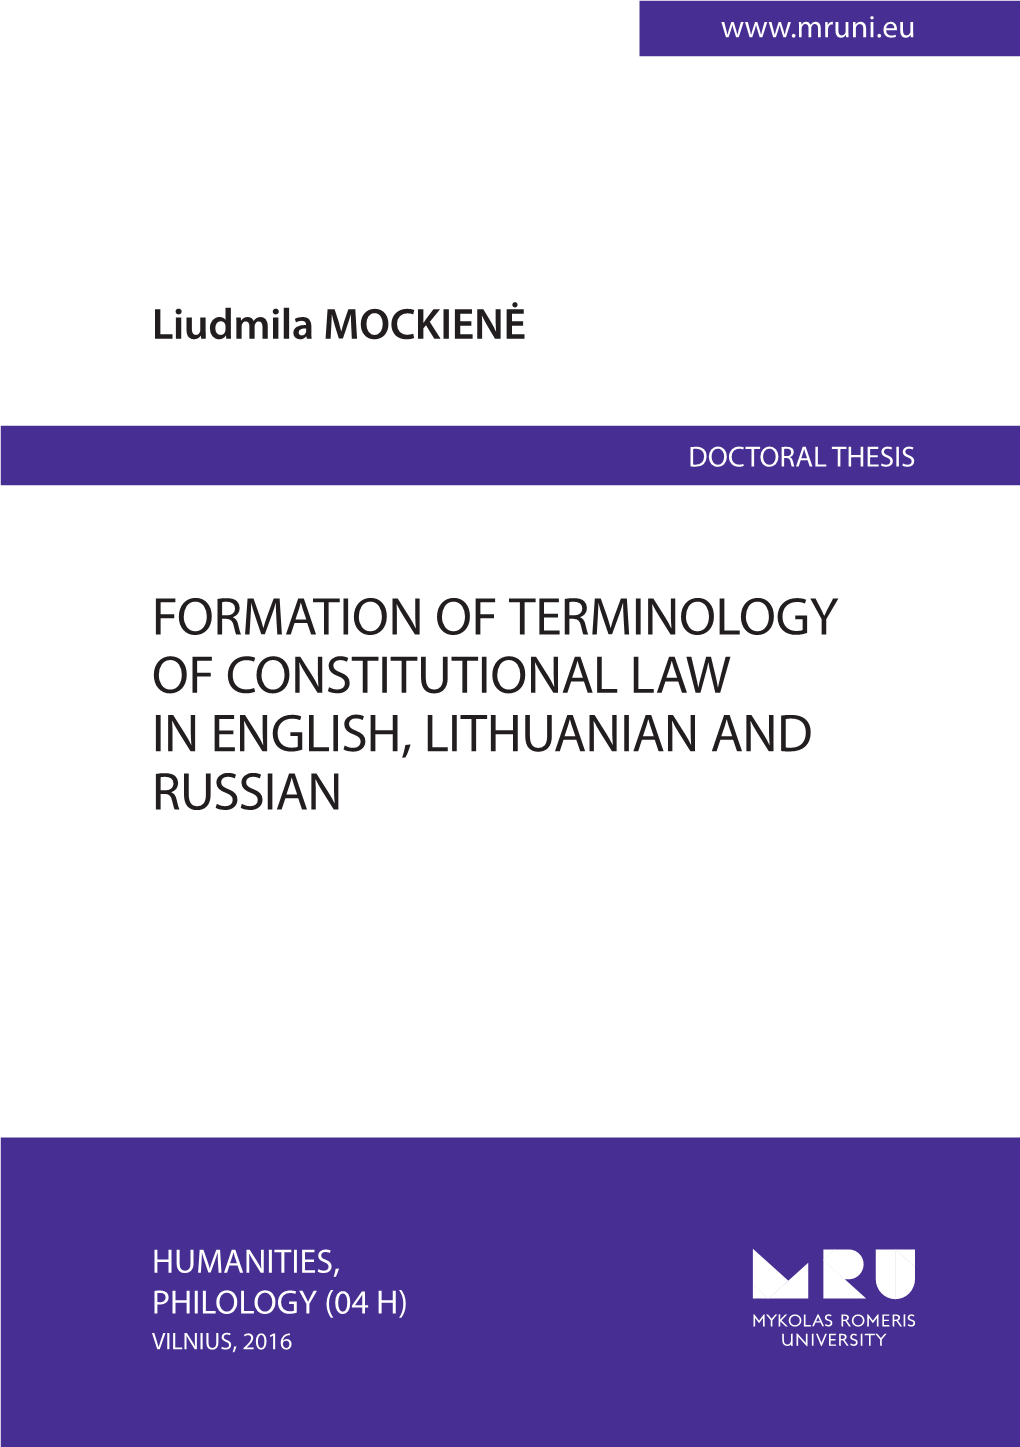 Formation of Terminology of Constitutional Law in English, Lithuanian and Russian